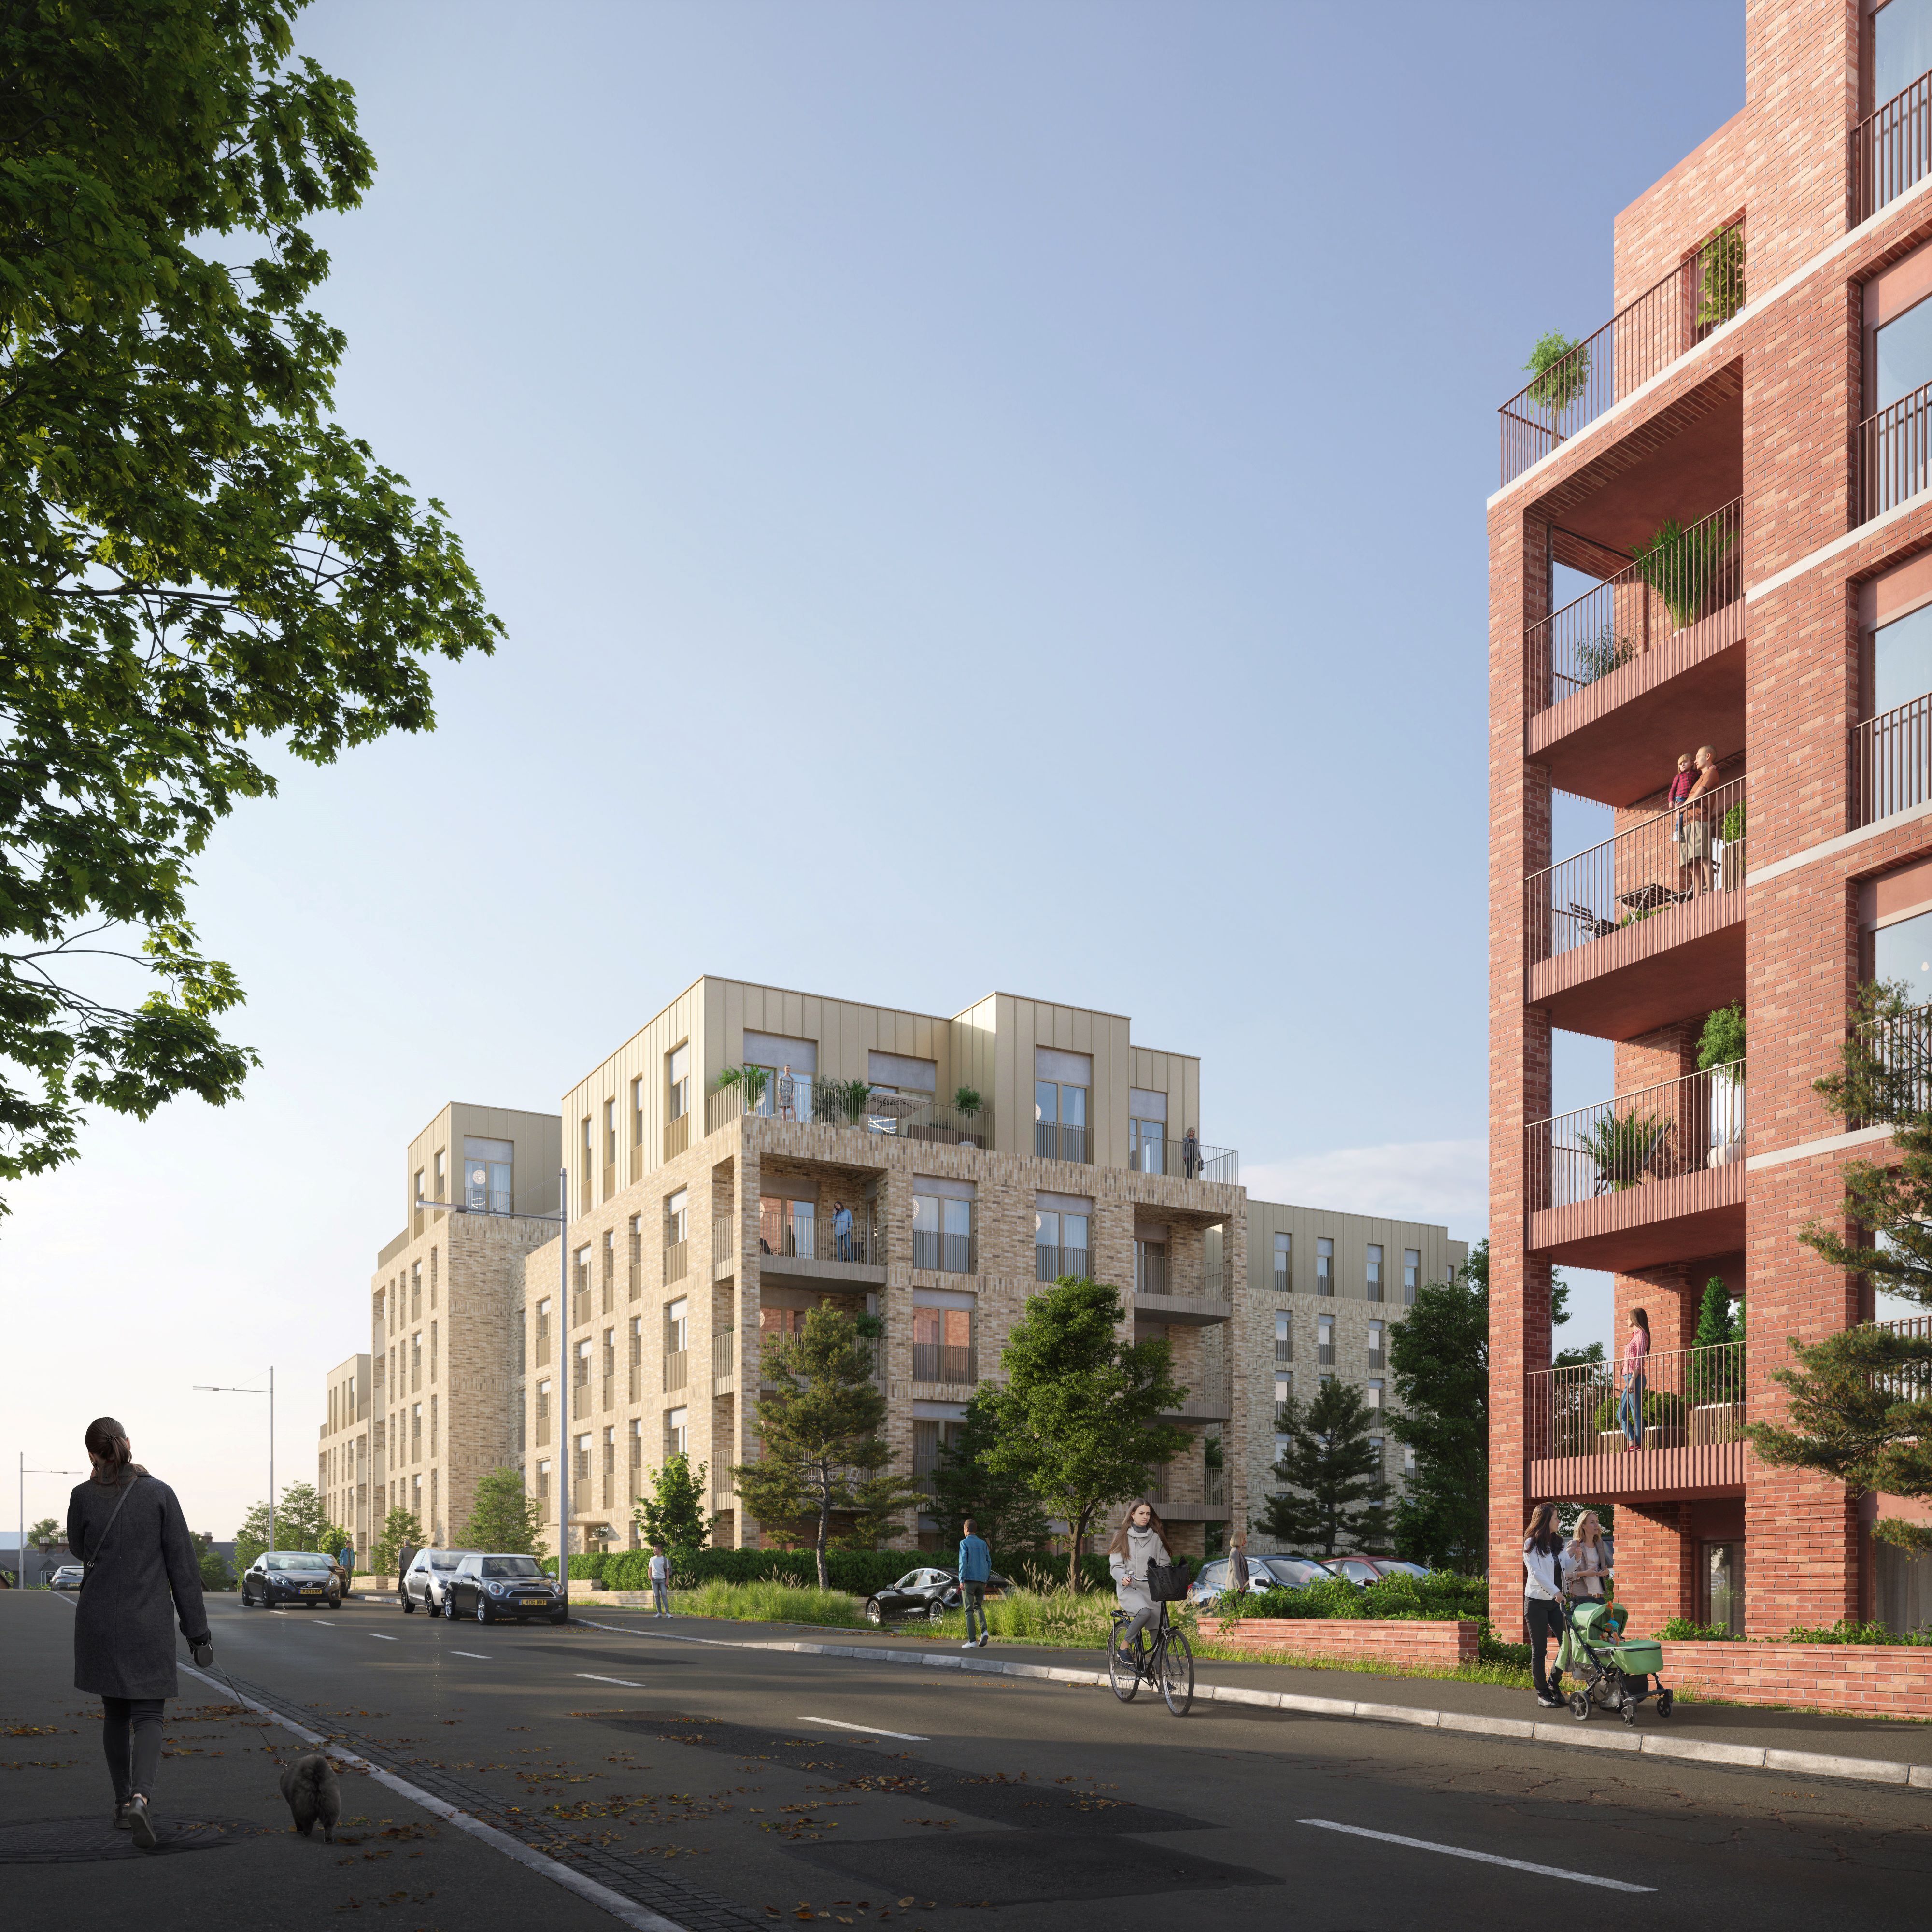 Cala Homes submits plans for 227 new apartments in Cathcart